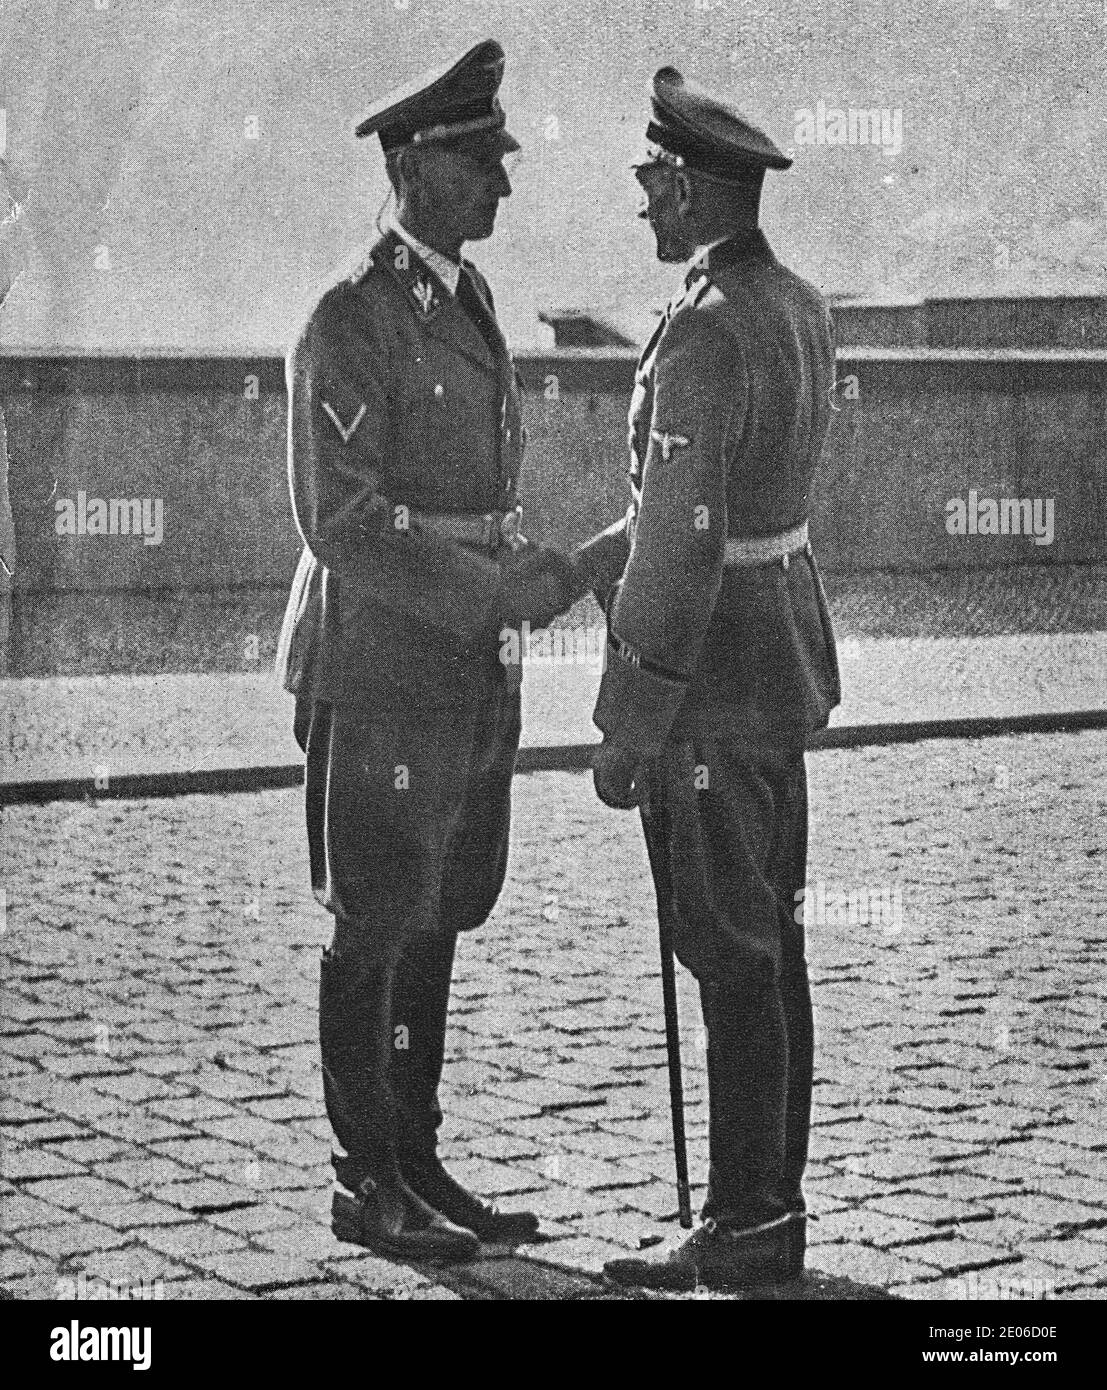 PRAGUE, PROTECTORATE OF BOHEMIA AND MORAVIA - SEPTEMBER 28, 1941: On 27 September 1941, Heydrich was appointed Deputy Reich Protector of the Protector Stock Photo